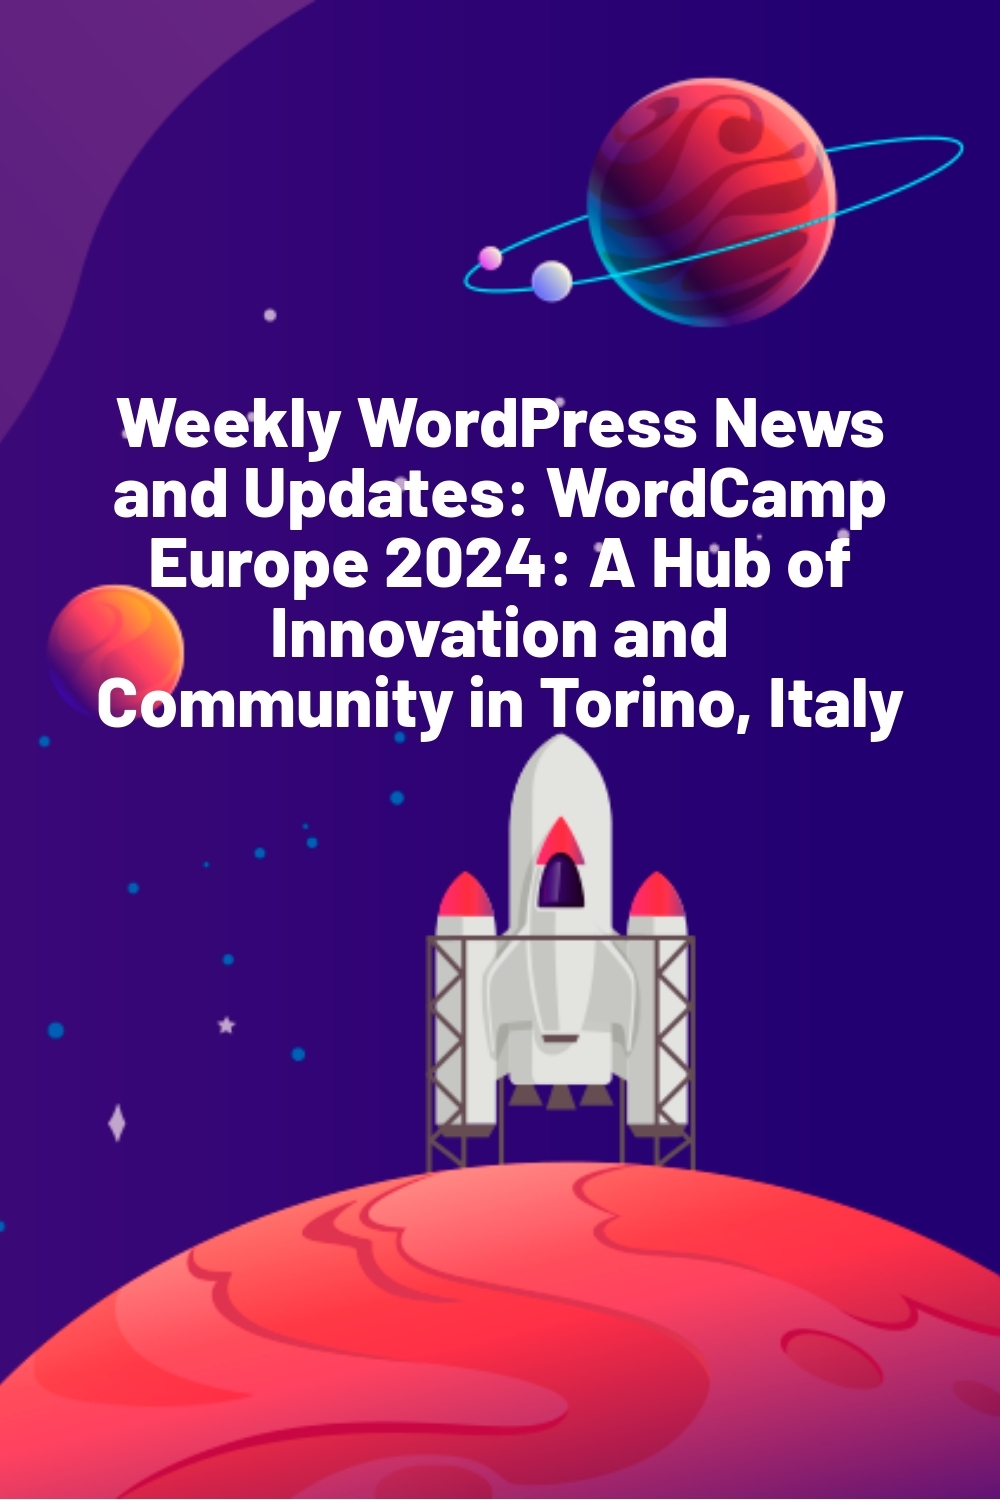 Weekly WordPress News and Updates: WordCamp Europe 2024: A Hub of Innovation and Community in Torino, Italy